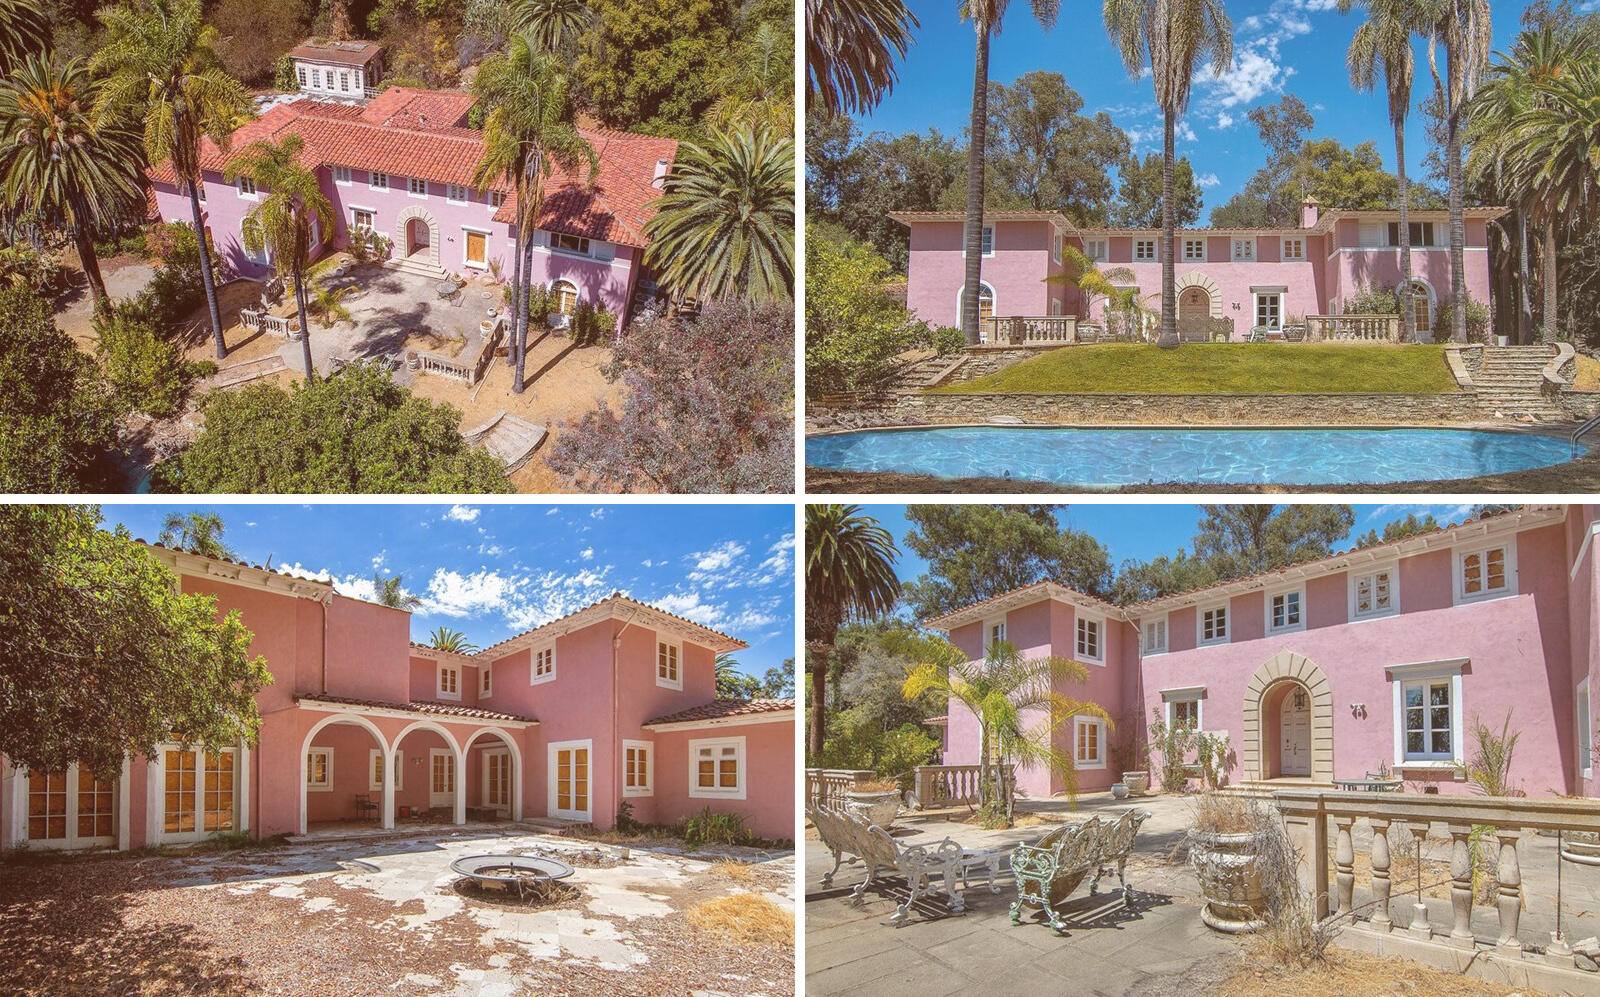 The Bel Air house (Coldwell Banker Realty)